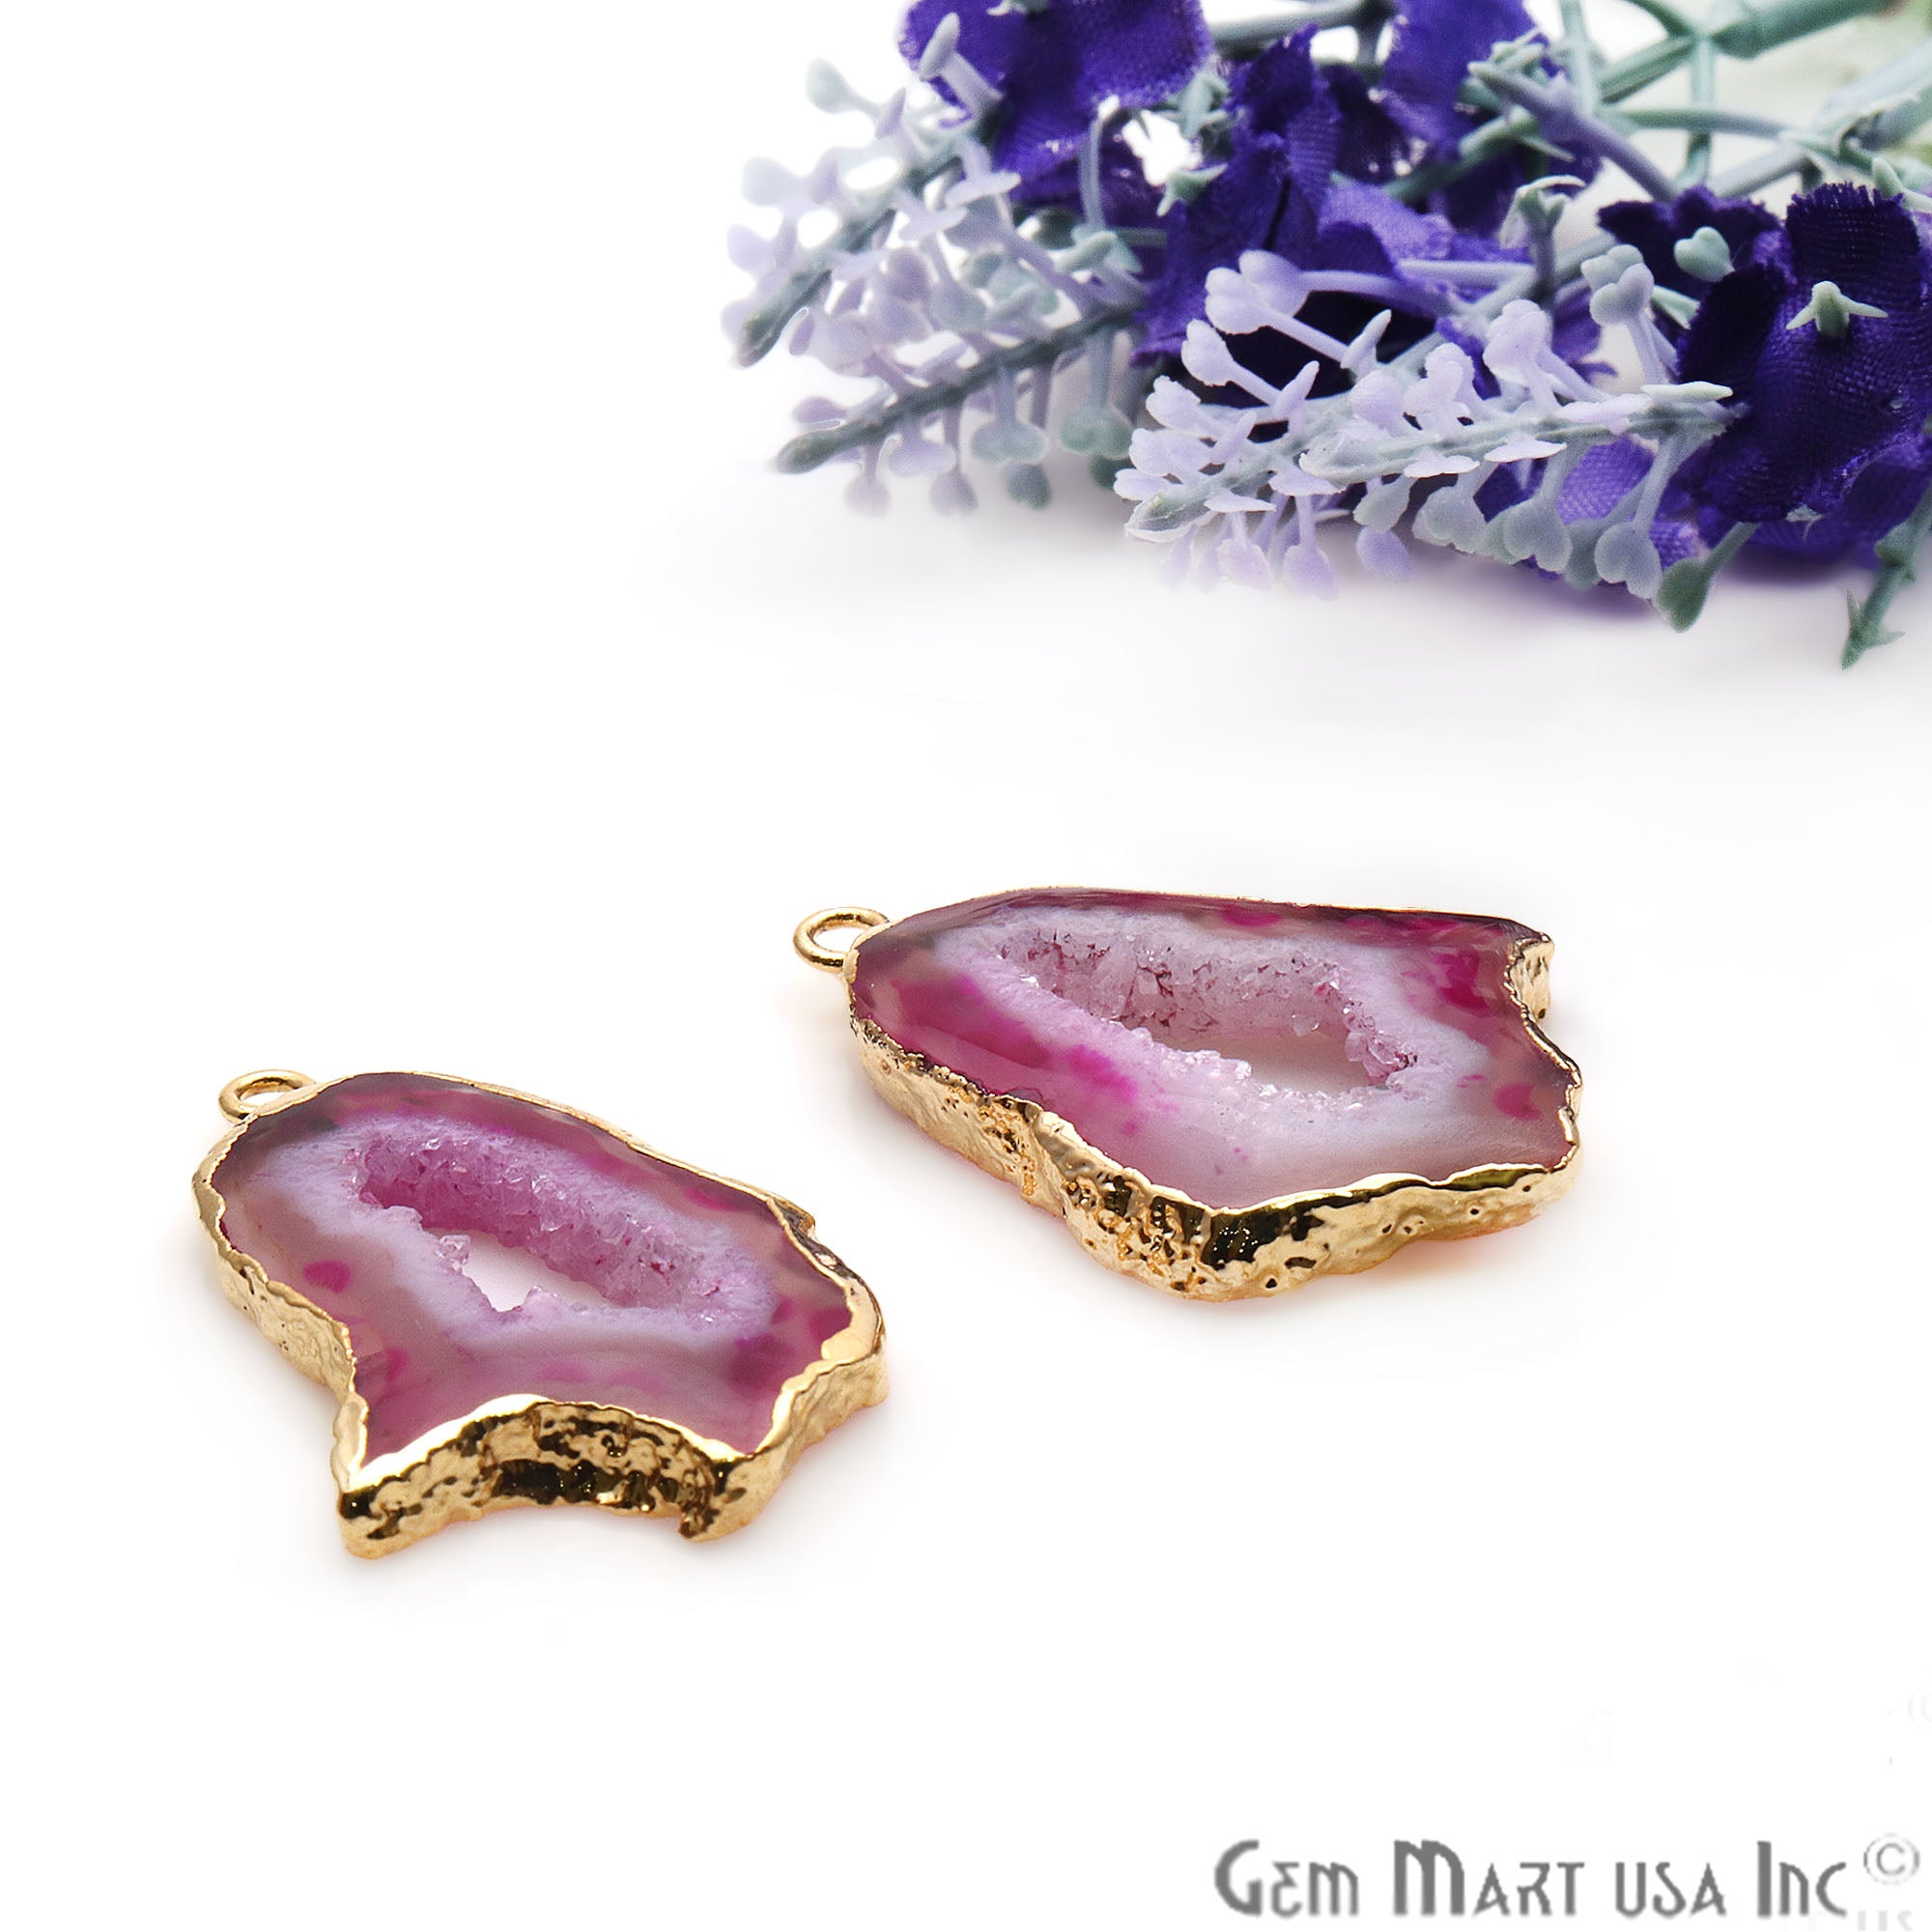 Agate Slice 32x20mm Organic Gold Electroplated Gemstone Earring Connector 1 Pair - GemMartUSA